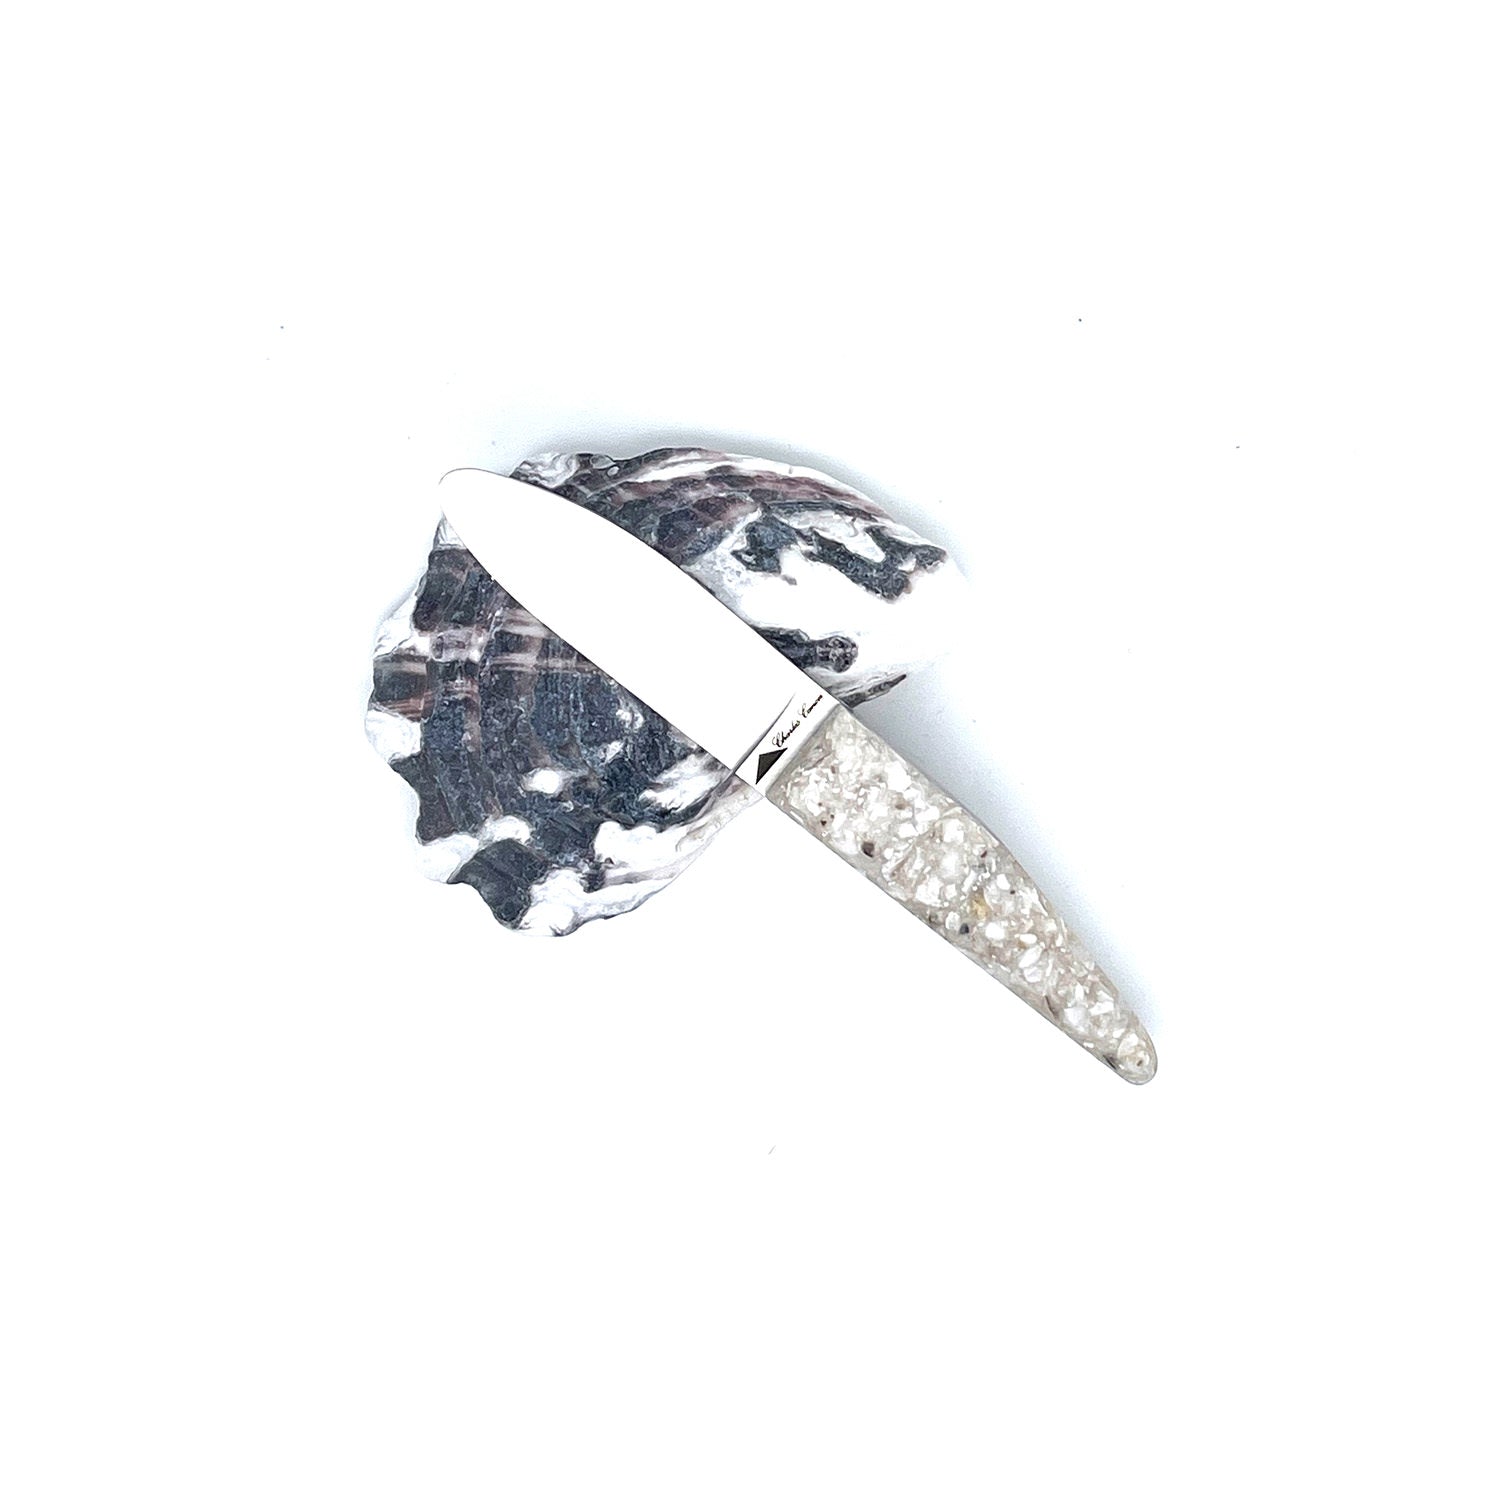 Children's knife with a handle made from recycled oyster shells